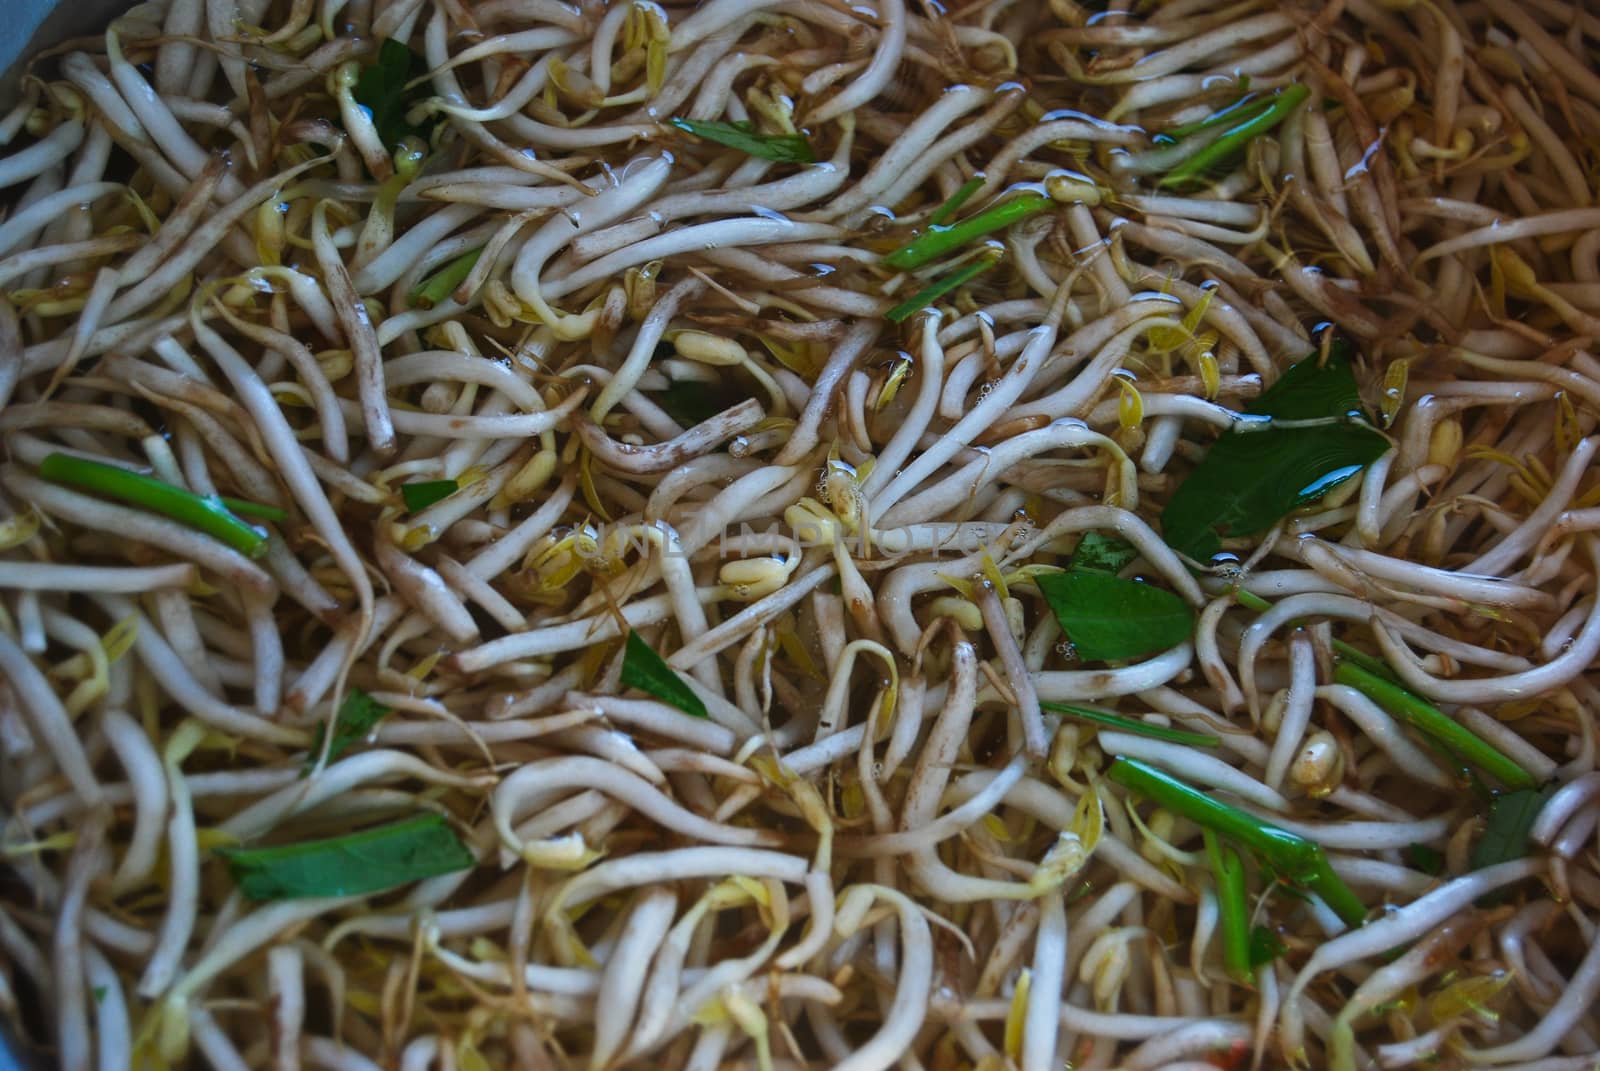 the bean sprout are put in the water before cooking